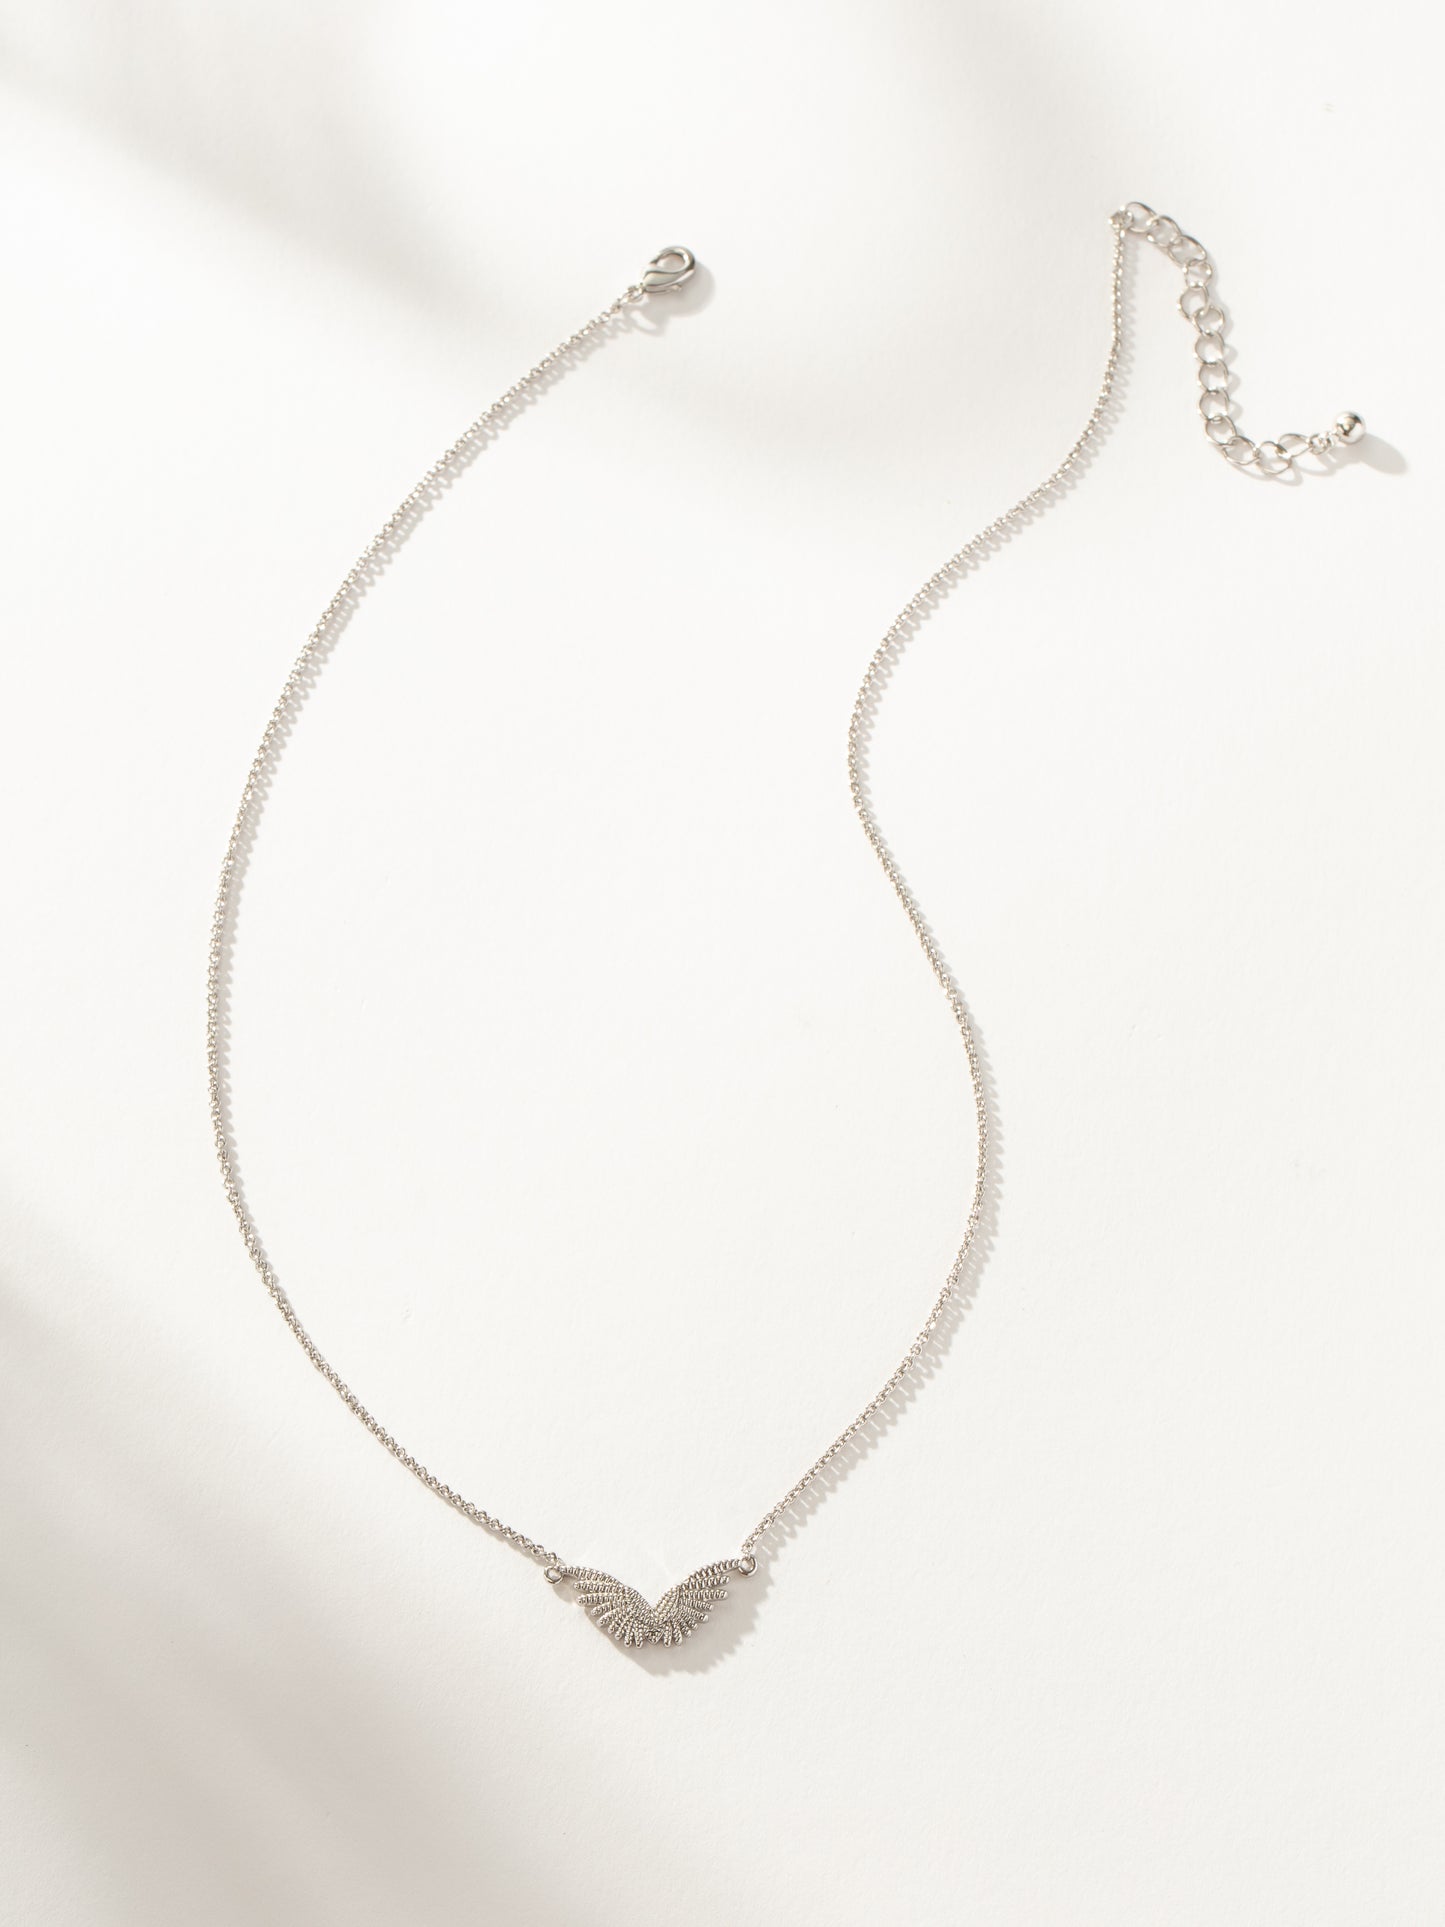 Protection Necklace | Silver | Product Image | Uncommon James